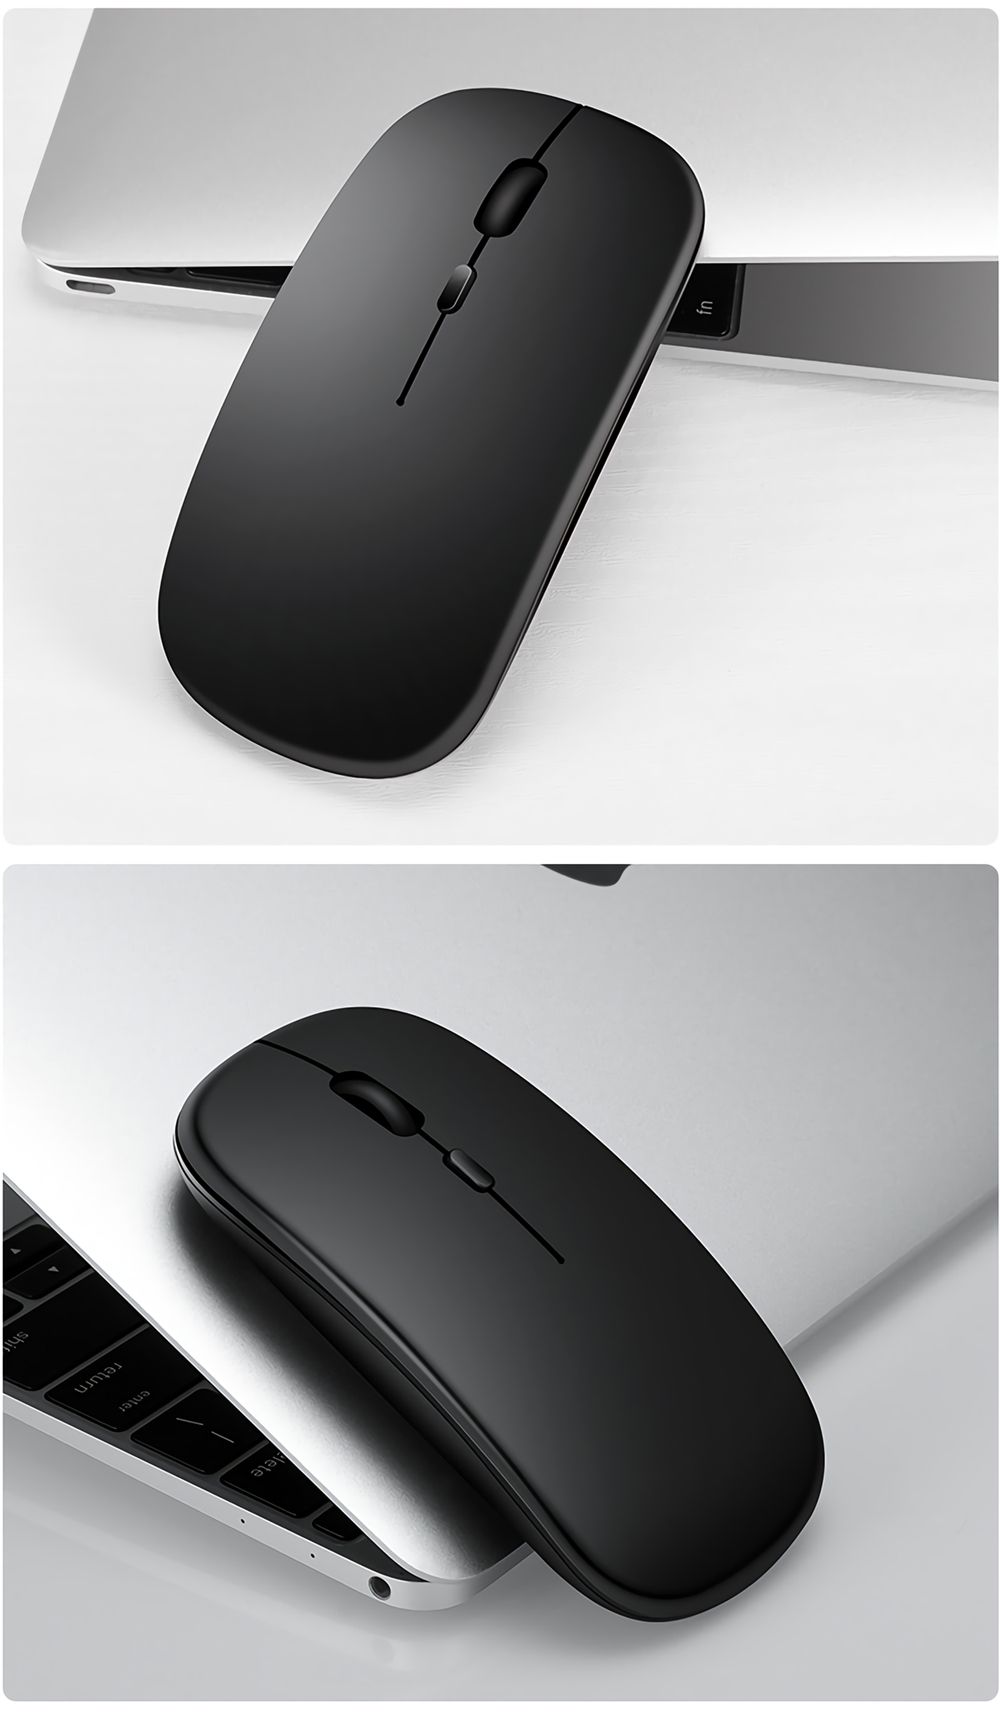 TWOLF-Q20-Wireless-Rechargeable-Mouse-24GHz-bluetooth5030-Dual-Modes-1600DPI-Ultra-thin-Silent-Porta-1716004